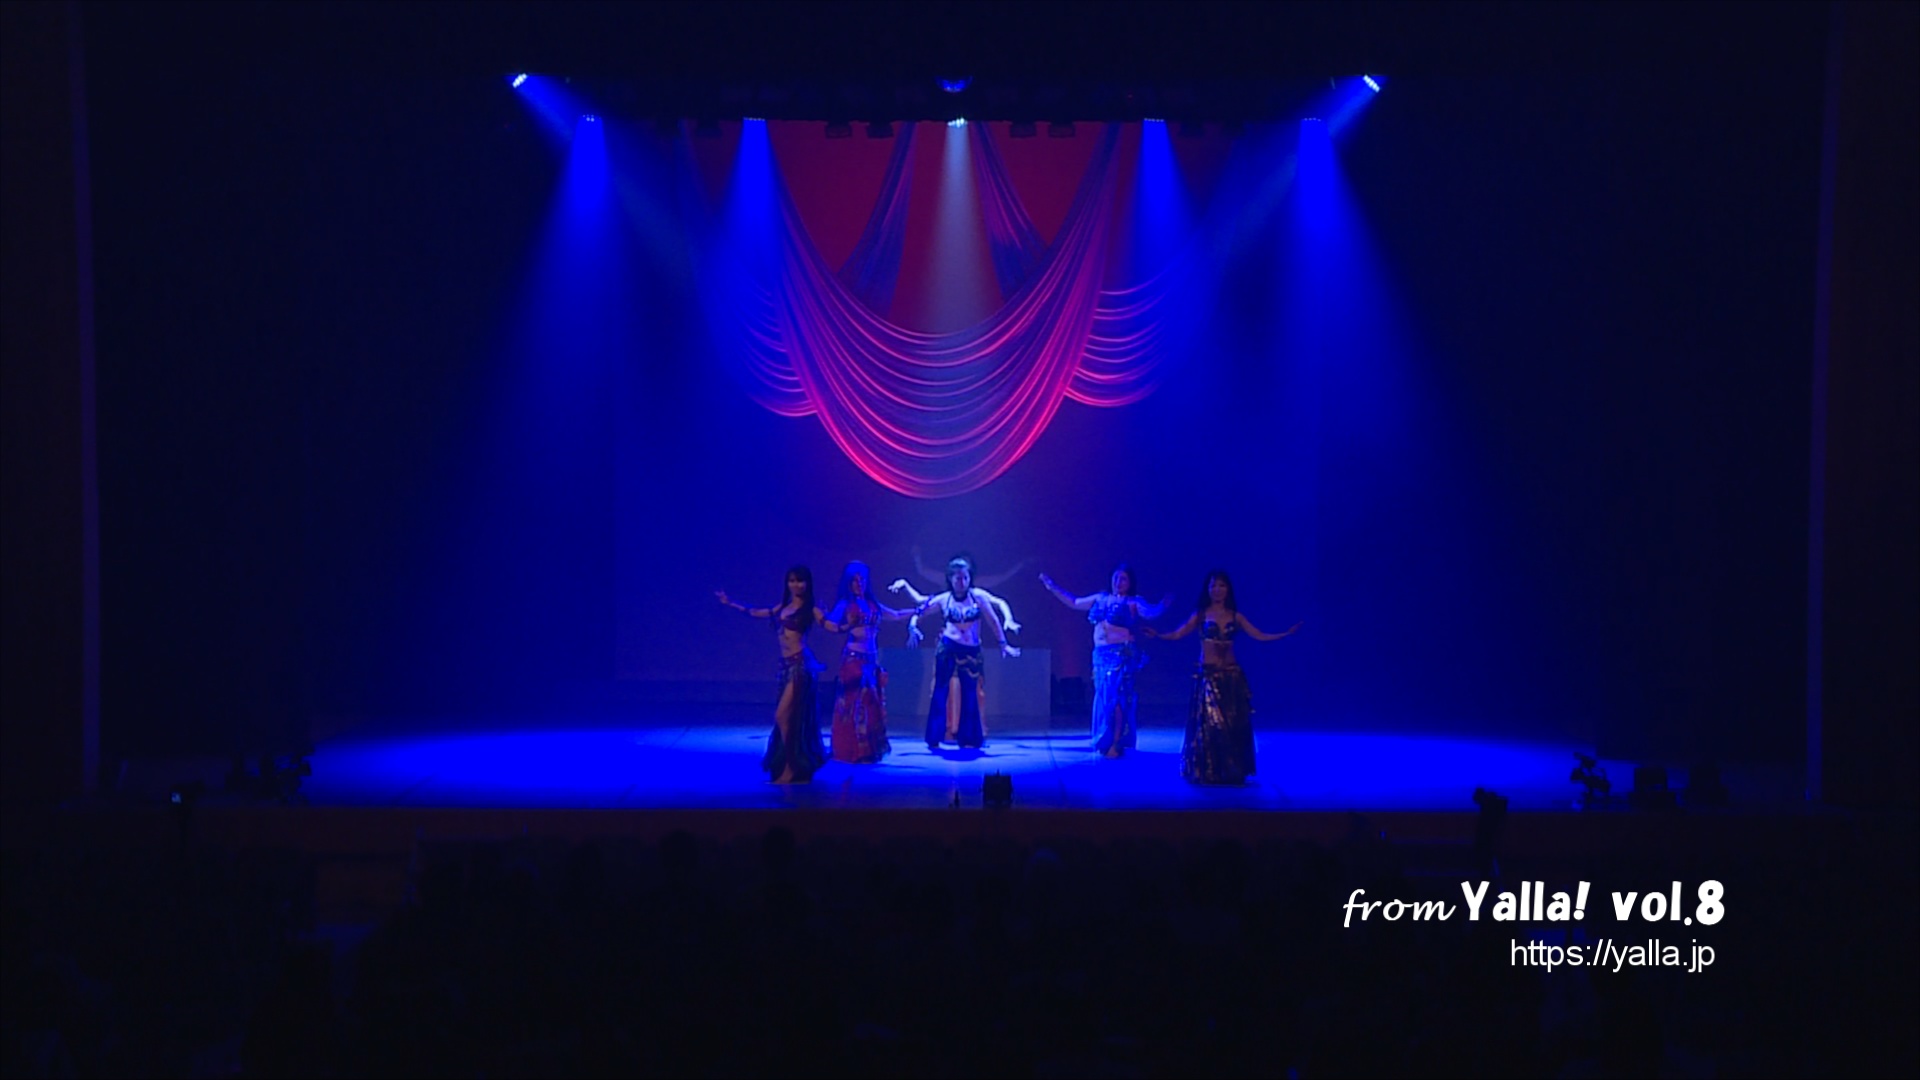 031-performancie-image-of-bellydance-for-yalla-8th-live-stage